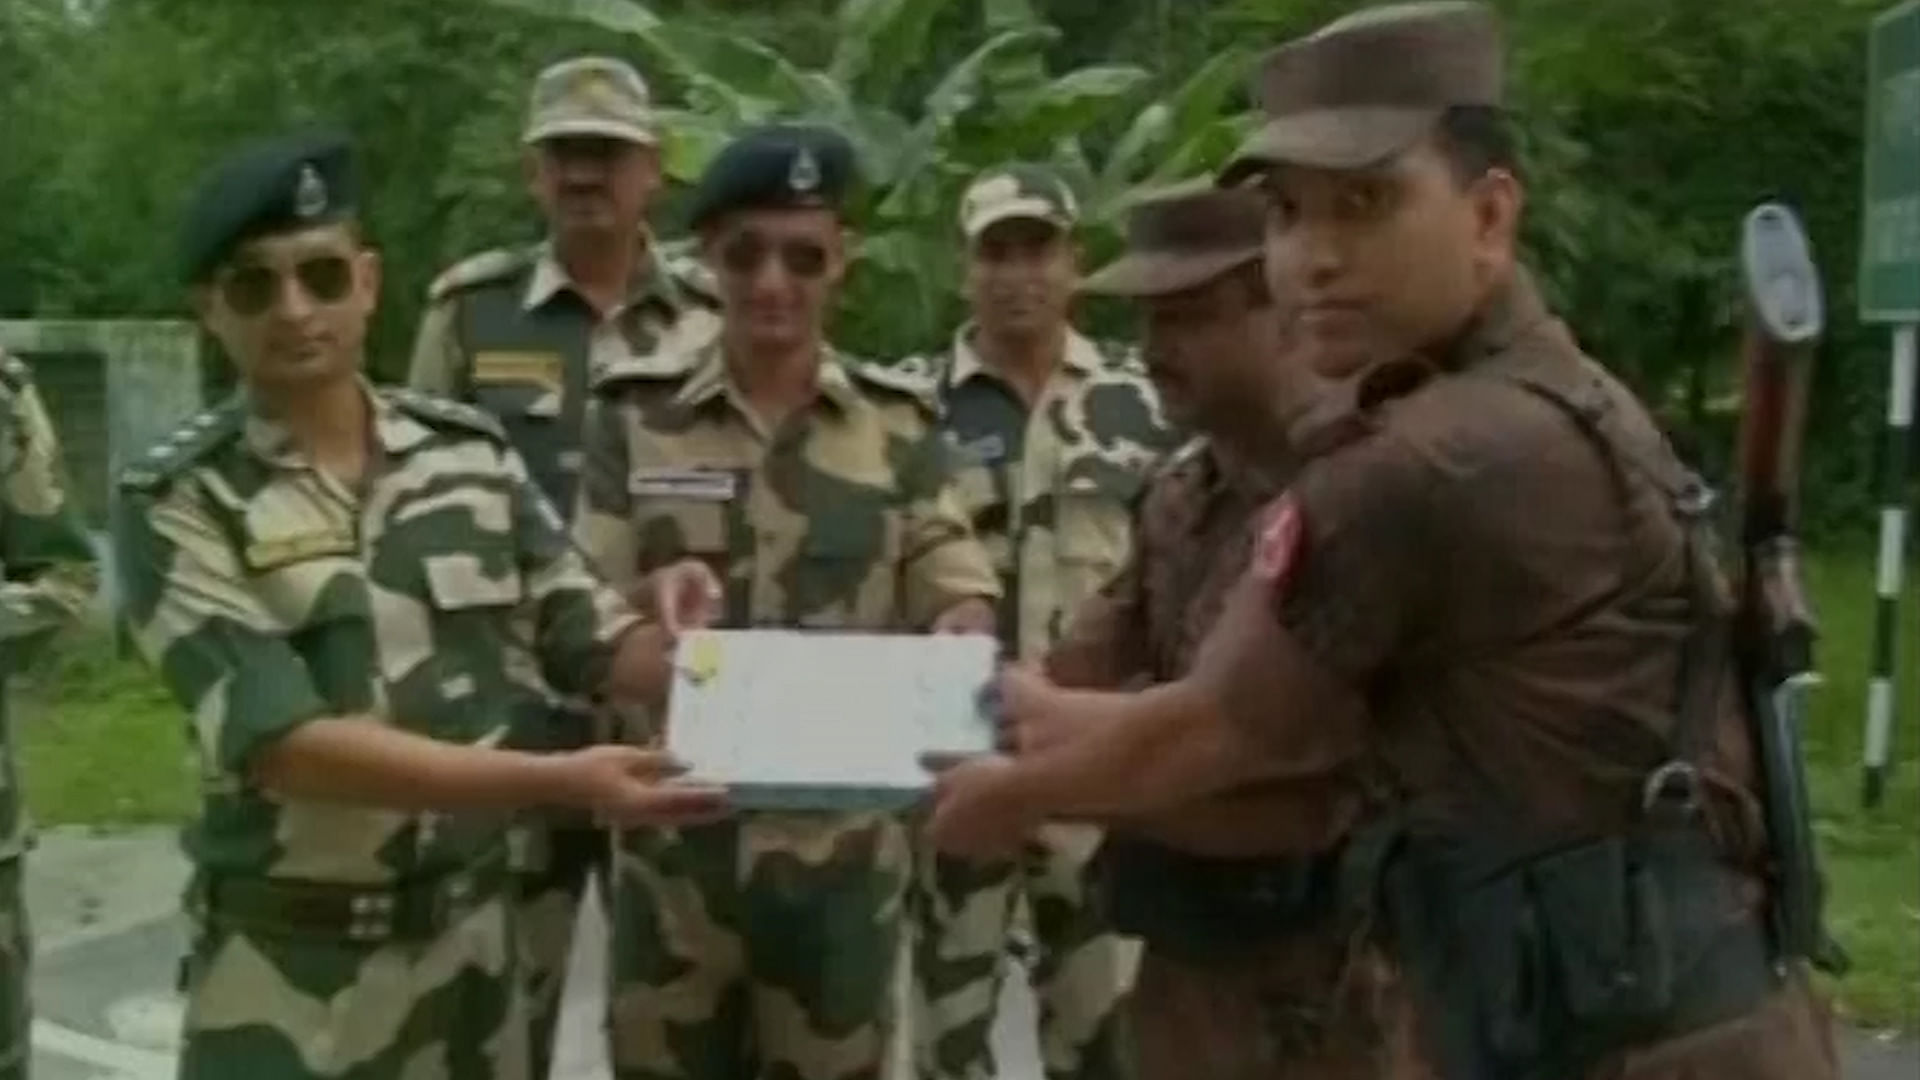 BSF and BGB troops exchanging sweets at Phulbari border in Jalpaiguri district, West Bengal on the occasion of Eid, on Friday. (Photo: ANI screengrab)